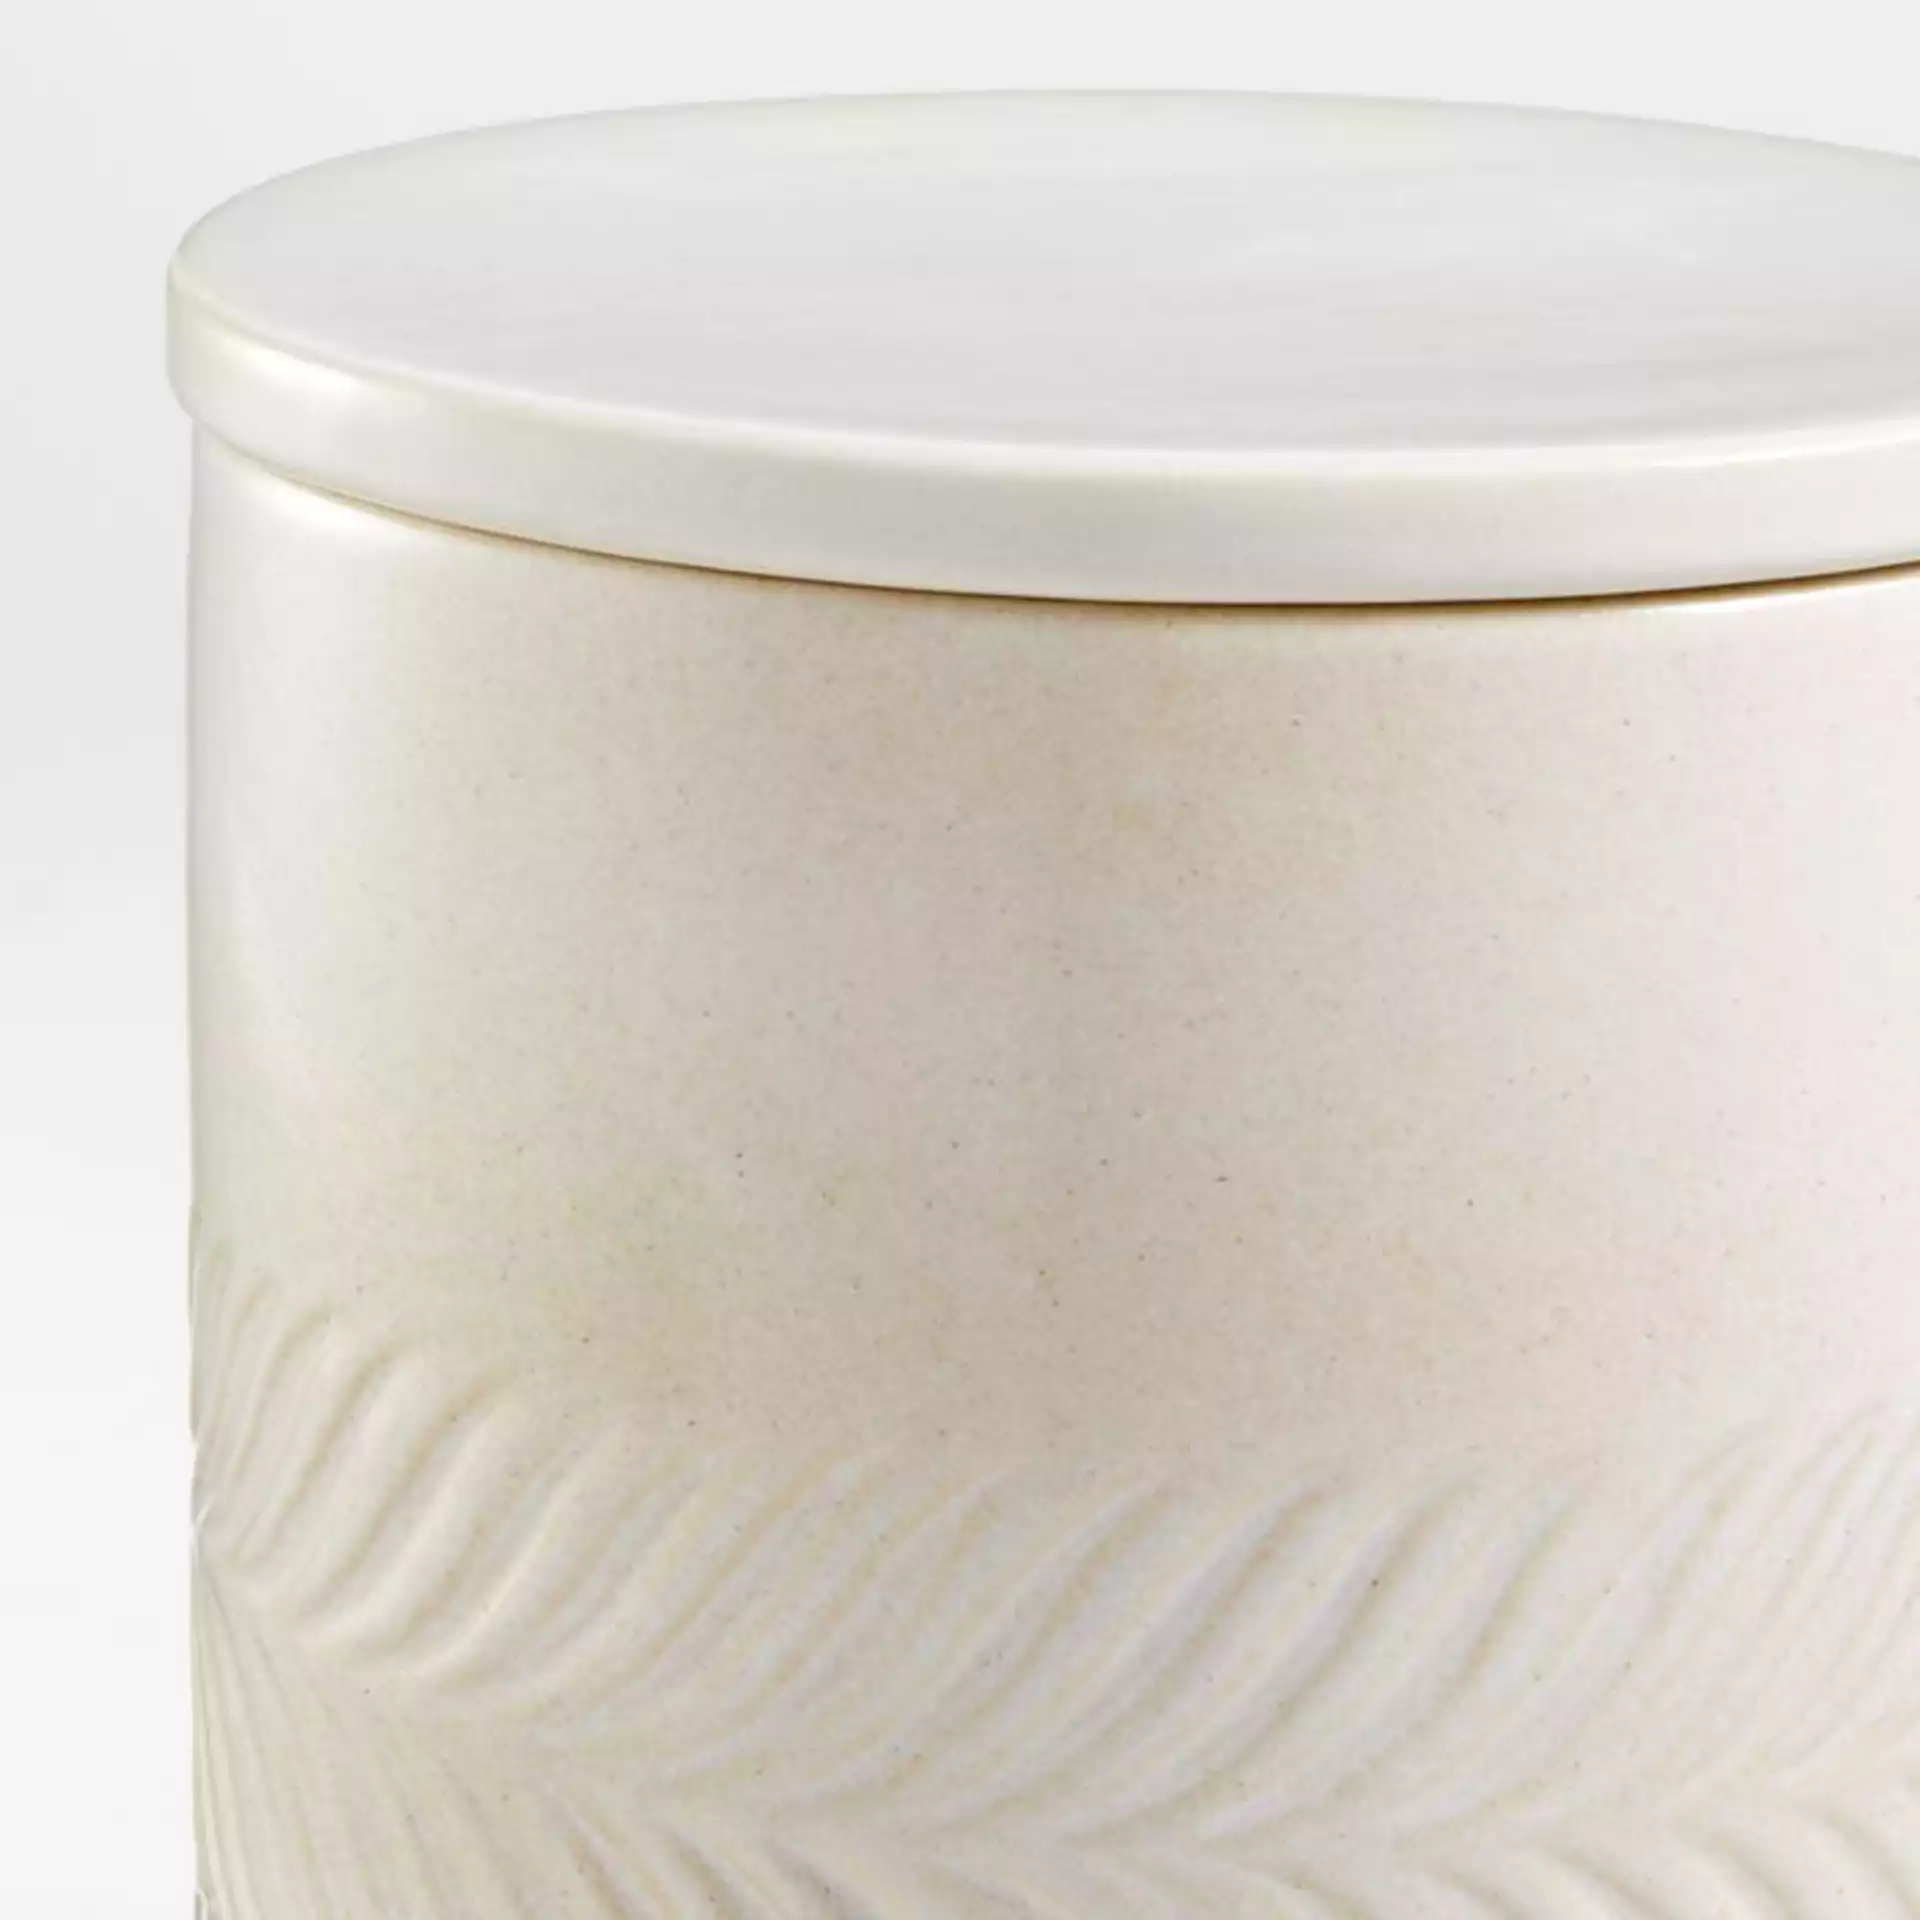 Fern Small White Ceramic Canister